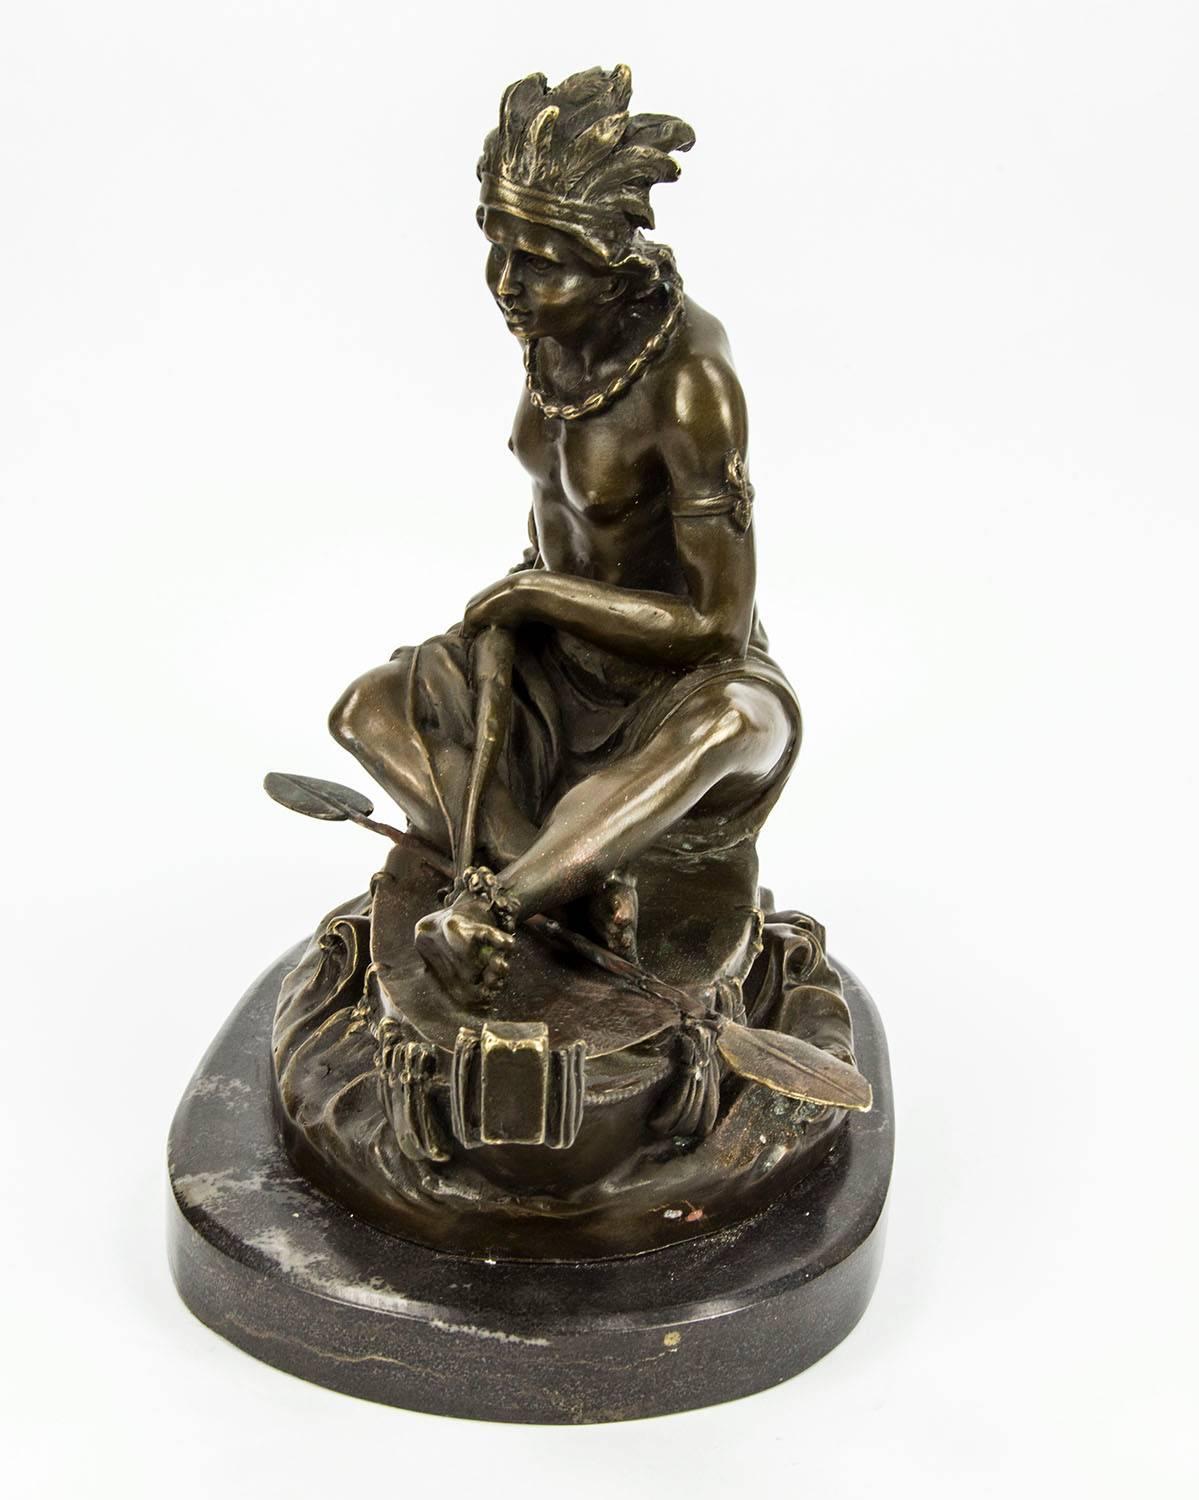 Striking bronze sculpture of a native American Indian chief, dressed in fancy native American attire, resting his feet at the front of the canoe, signed: Duchoiselle: atop a marble base. Bronze measures approximately: 14.5